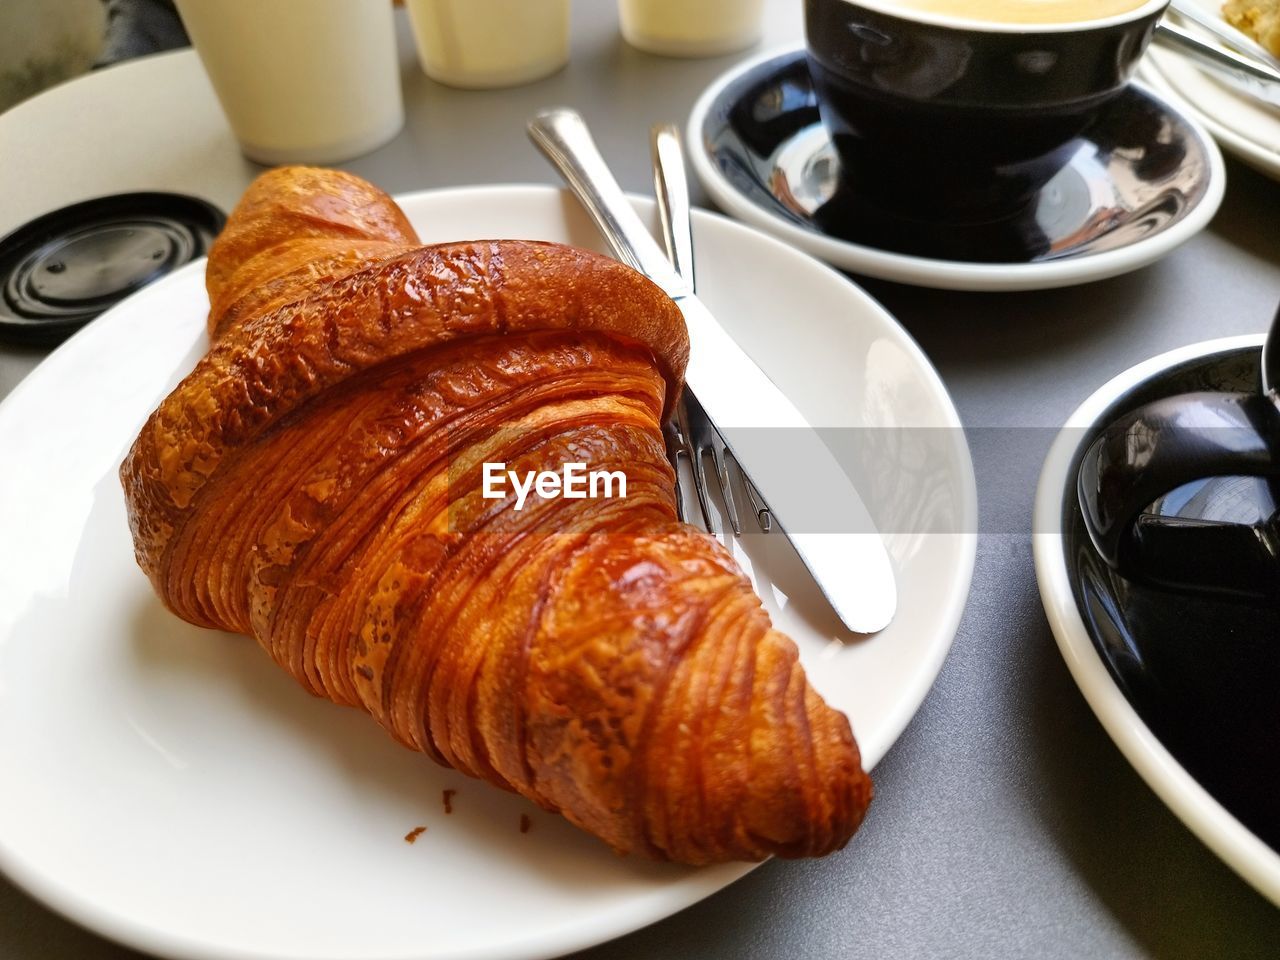 food and drink, croissant, food, drink, cup, meal, dish, mug, plate, french food, breakfast, dessert, coffee, coffee cup, baked, table, viennoiserie, refreshment, pastry, freshness, no people, bread, cuisine, high angle view, indoors, fast food, crockery, hot drink, eating utensil, sweet food, close-up, kitchen utensil, still life, baked pastry item